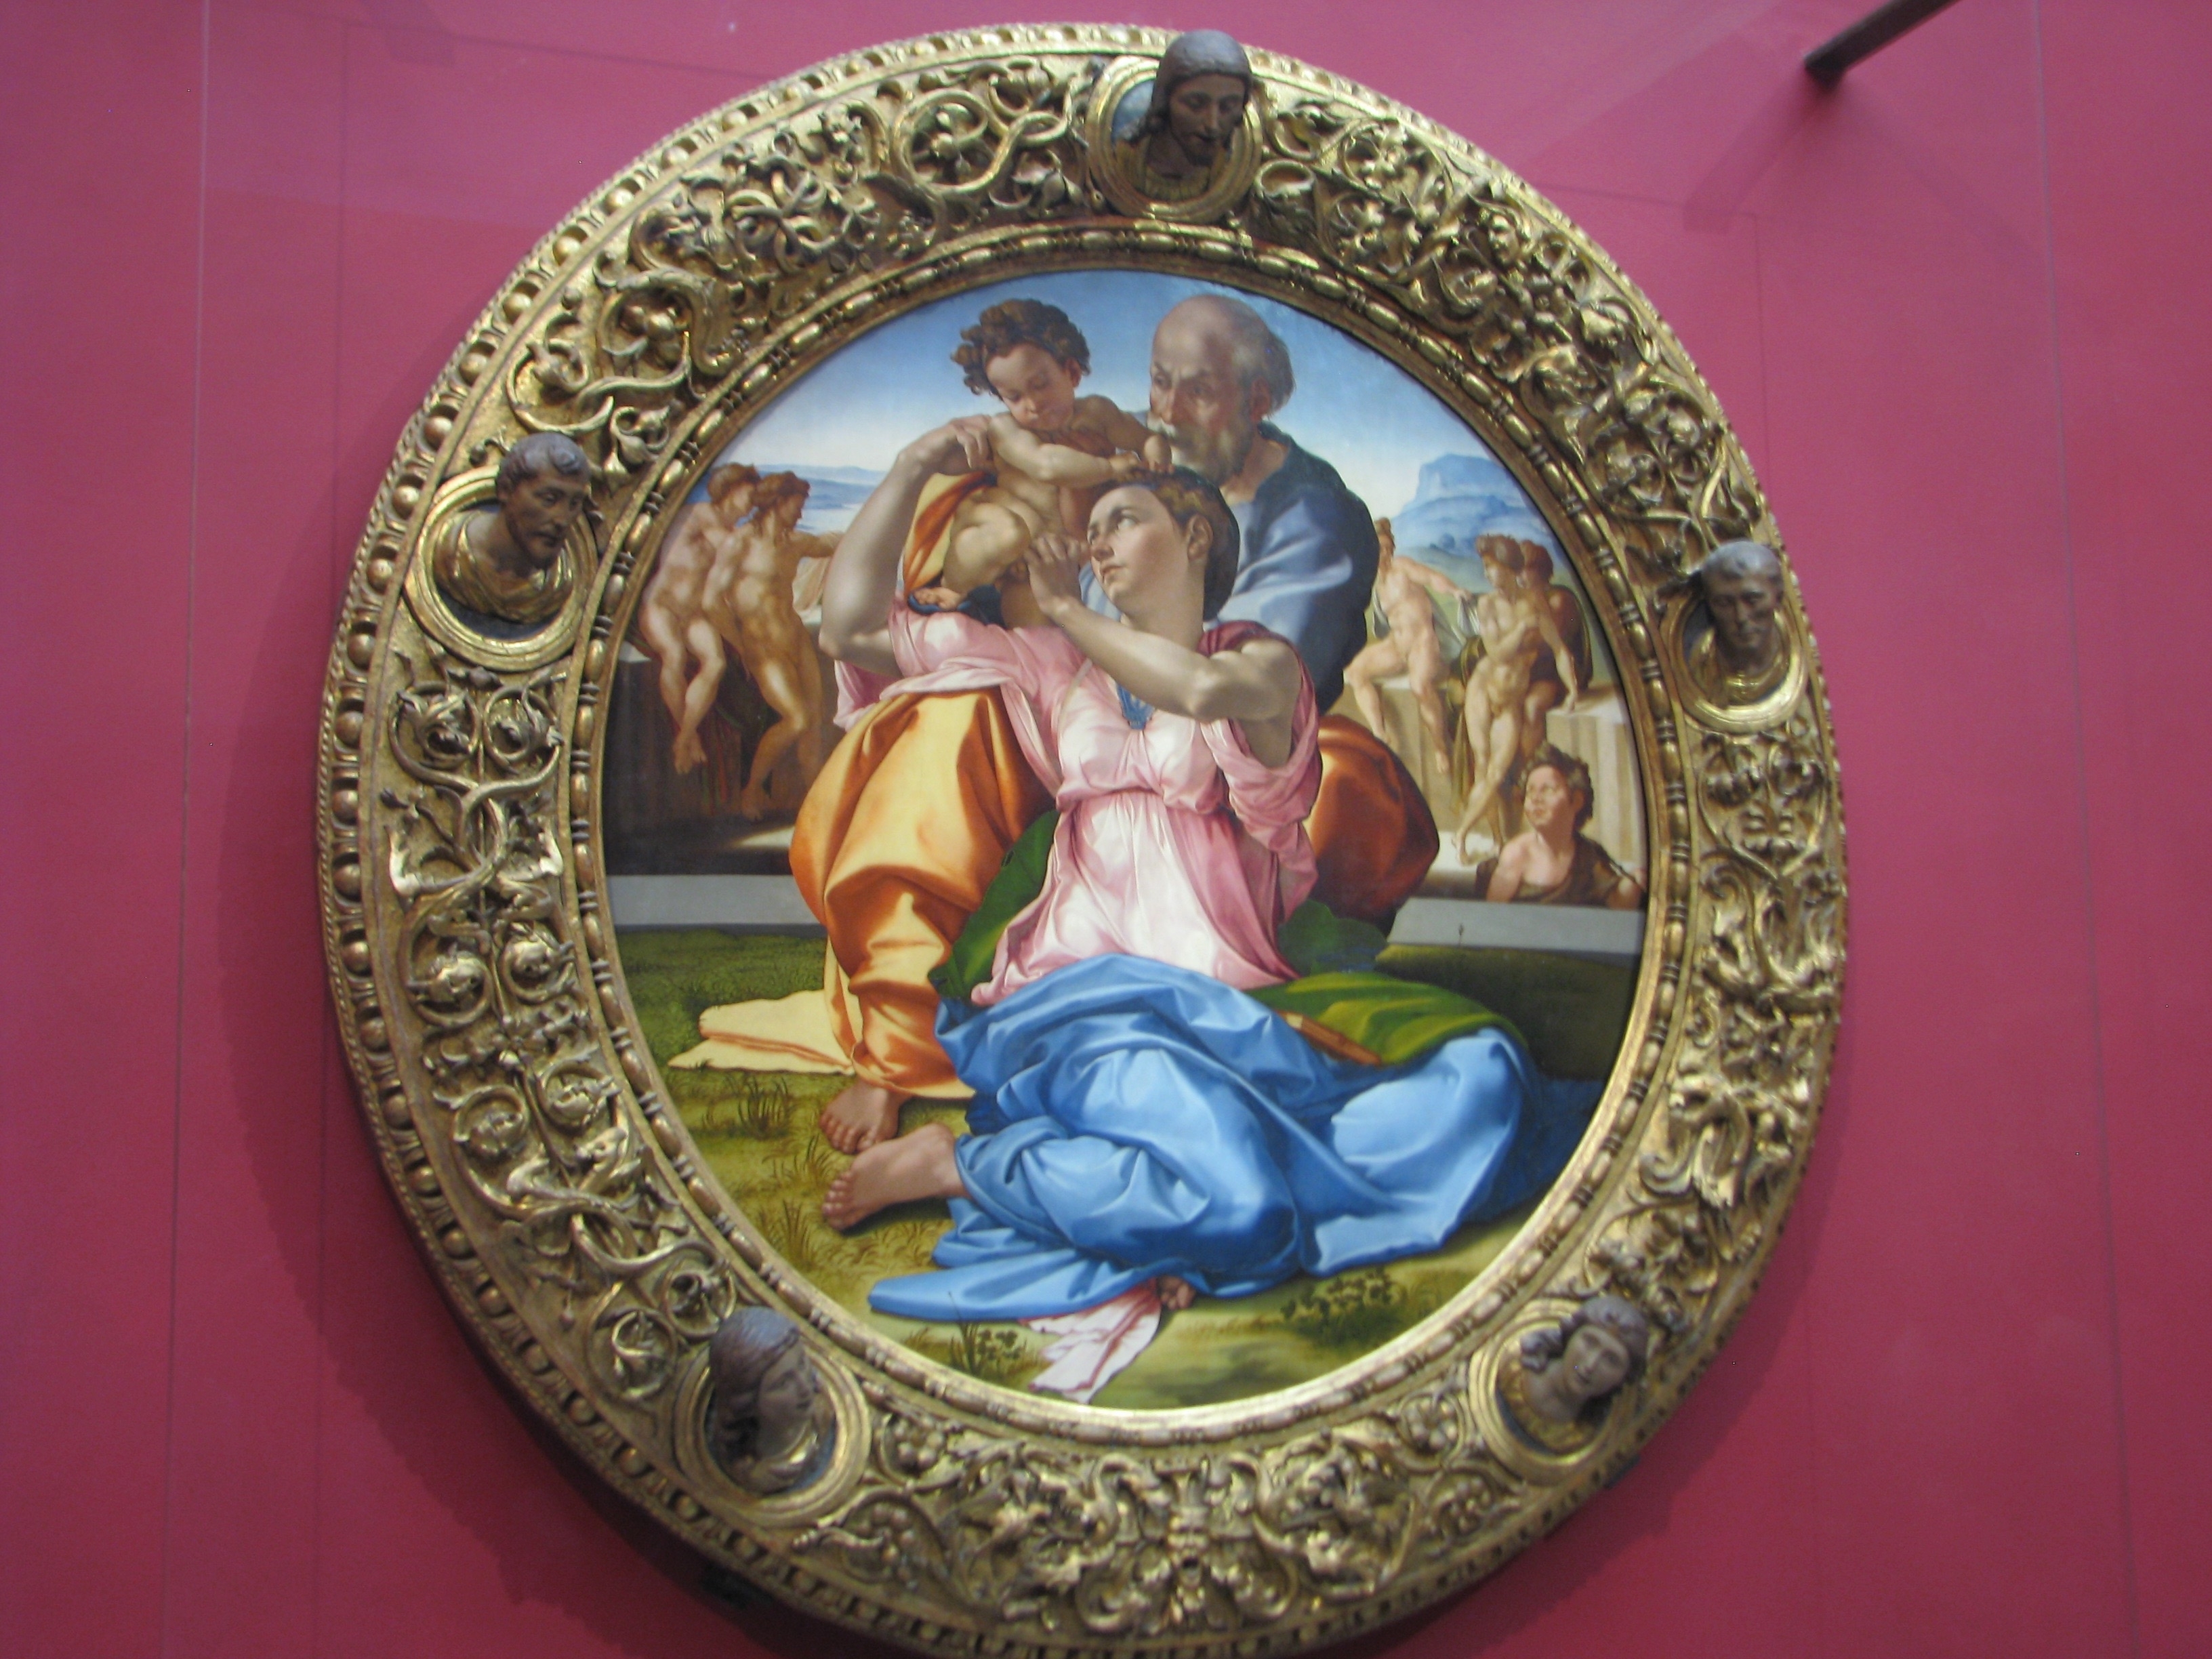 Painting in Uffizzi Gallery, Florence